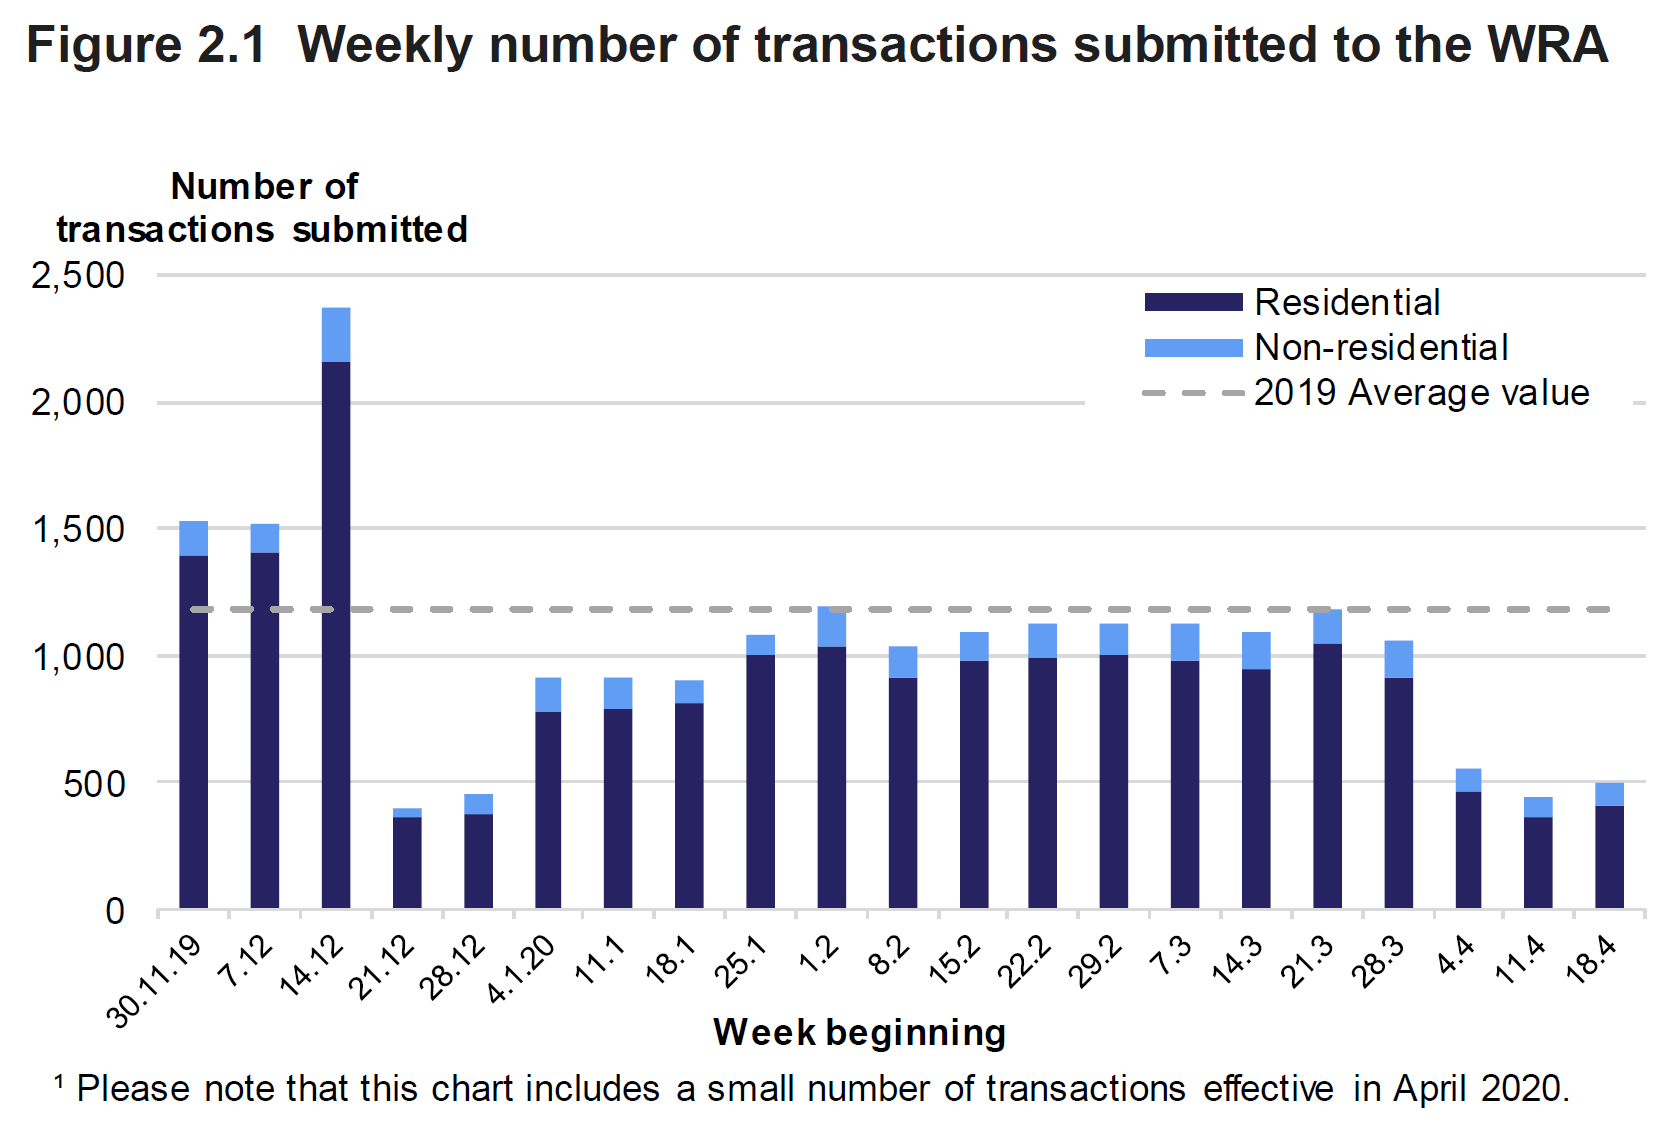 Figure 2.1 shows the number of residential and non-residential transactions submitted to the WRA each week from December 2019 to April 2020. Please note that this chart includes a small number of transactions effective in April 2020.